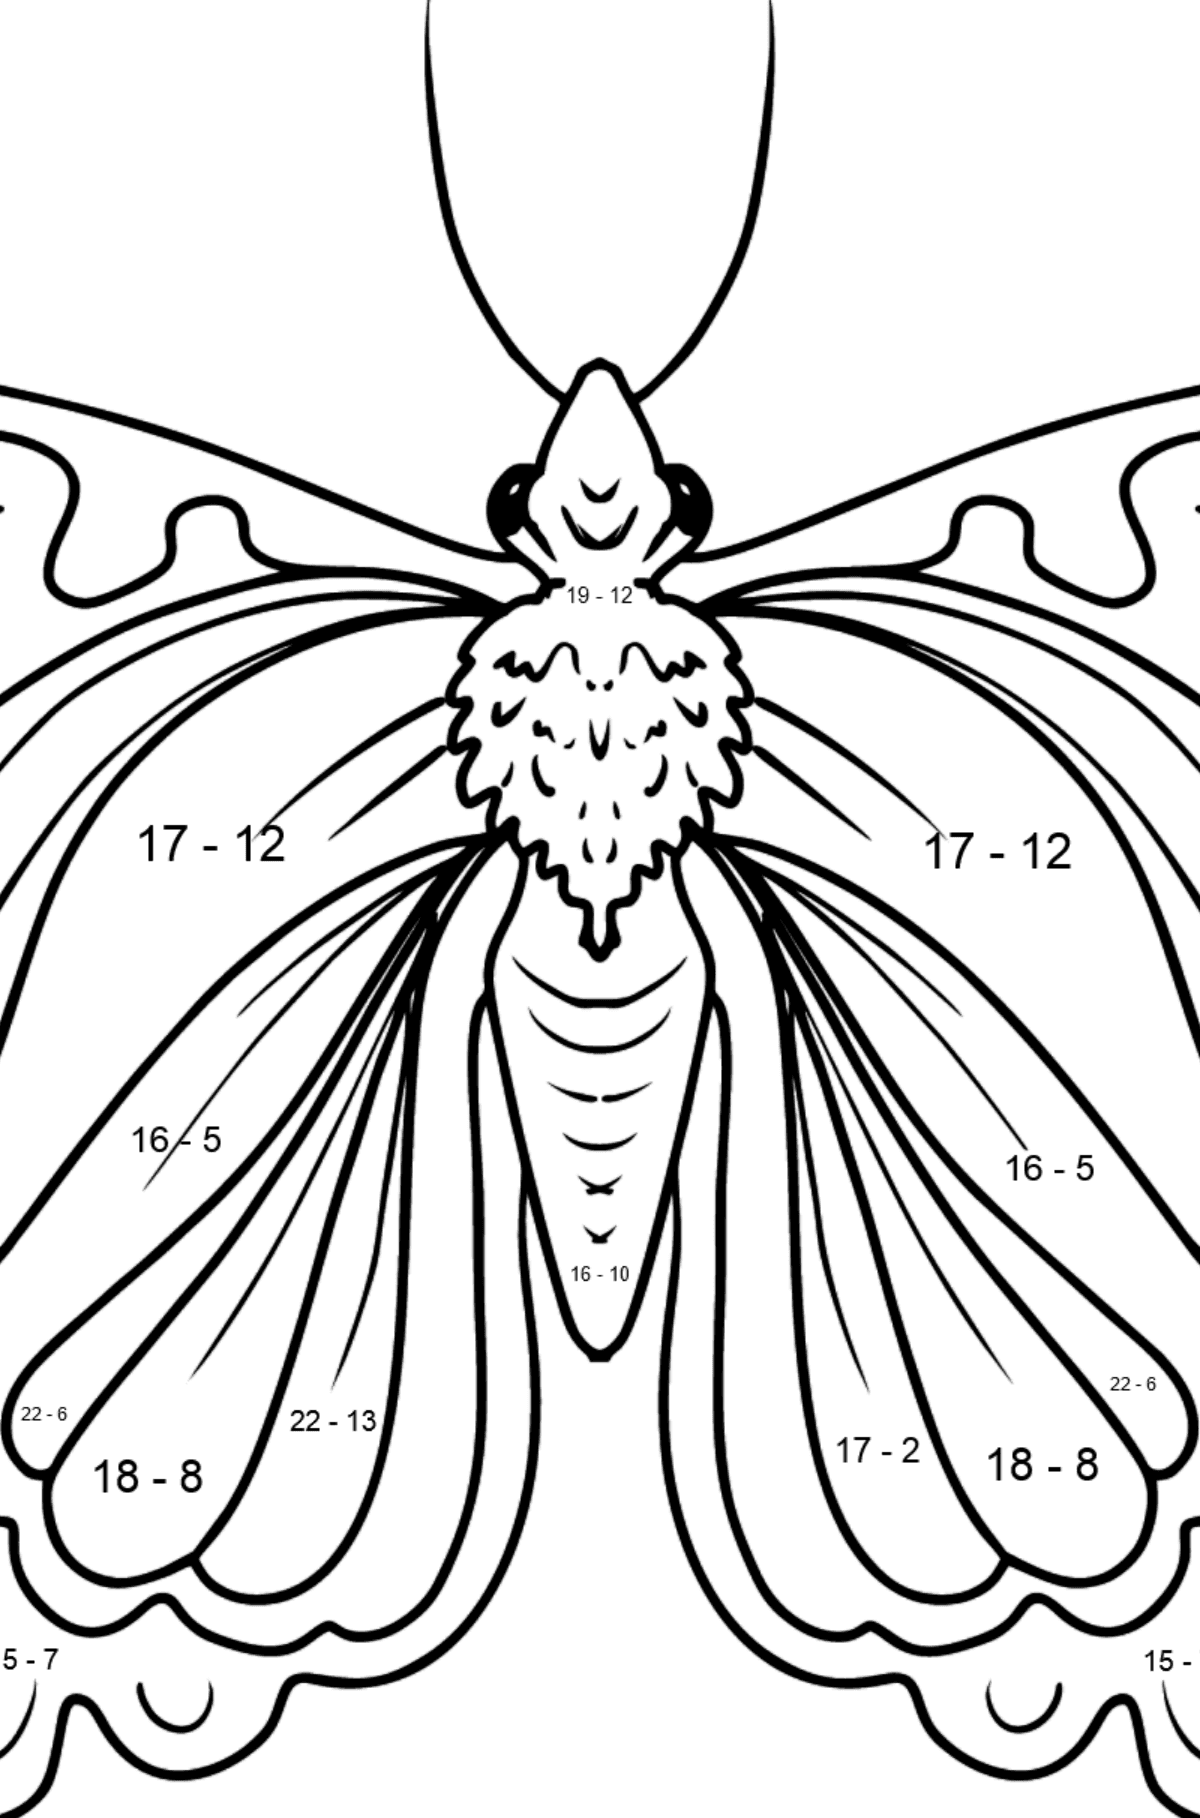 Cute Butterfly coloring page - Math Coloring - Subtraction for Kids